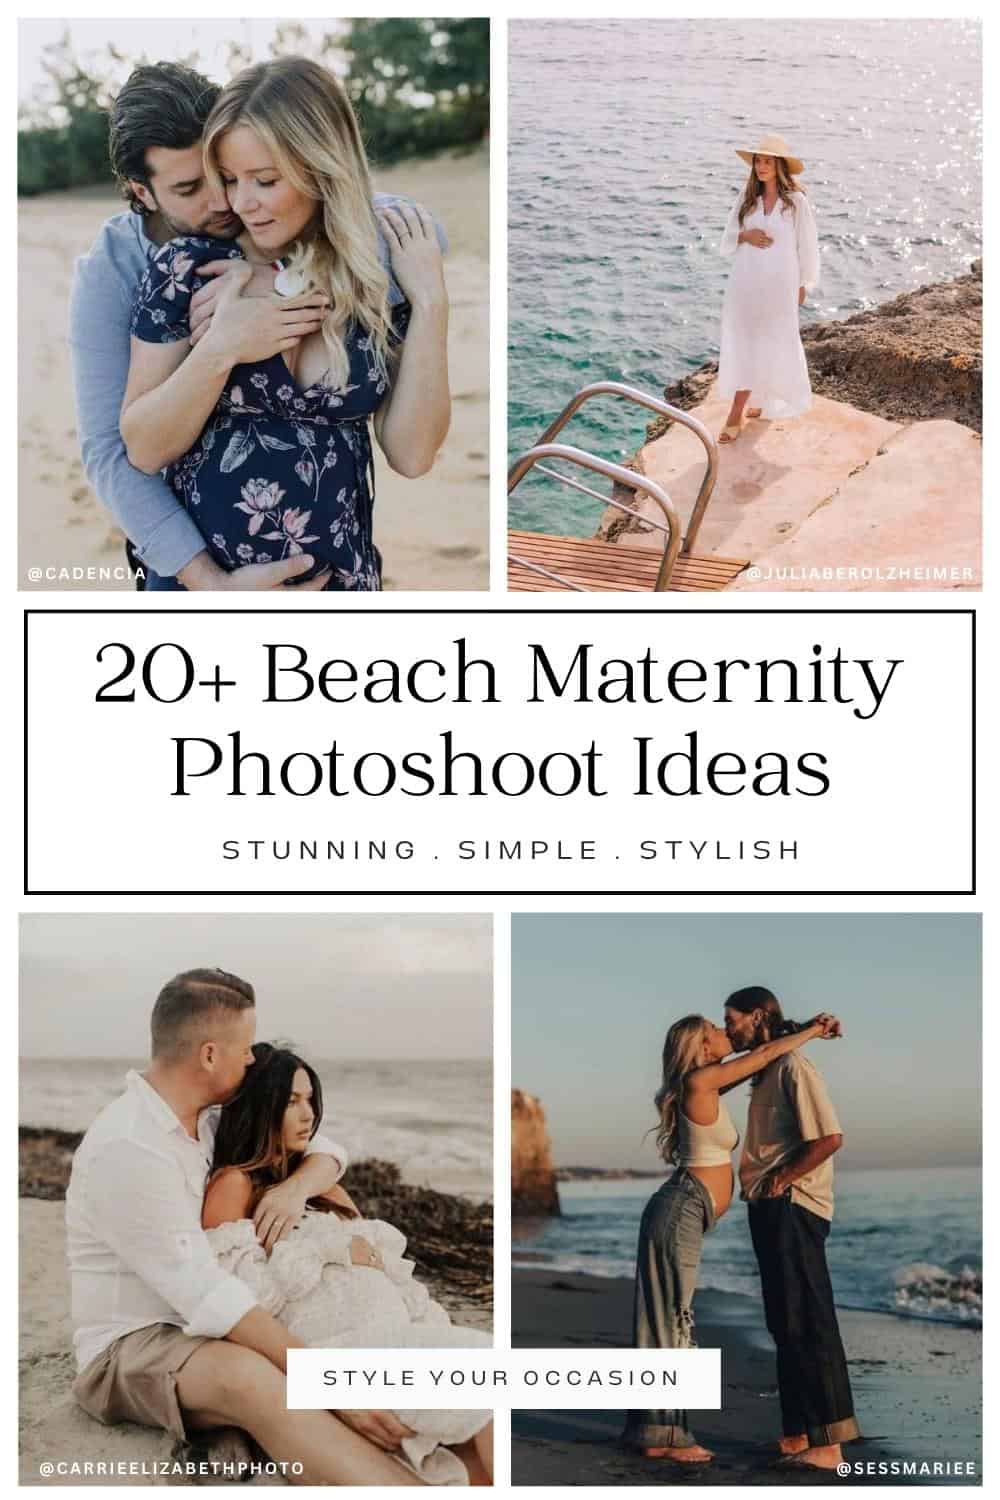 collage of four images of a beach Maternity photoshoot